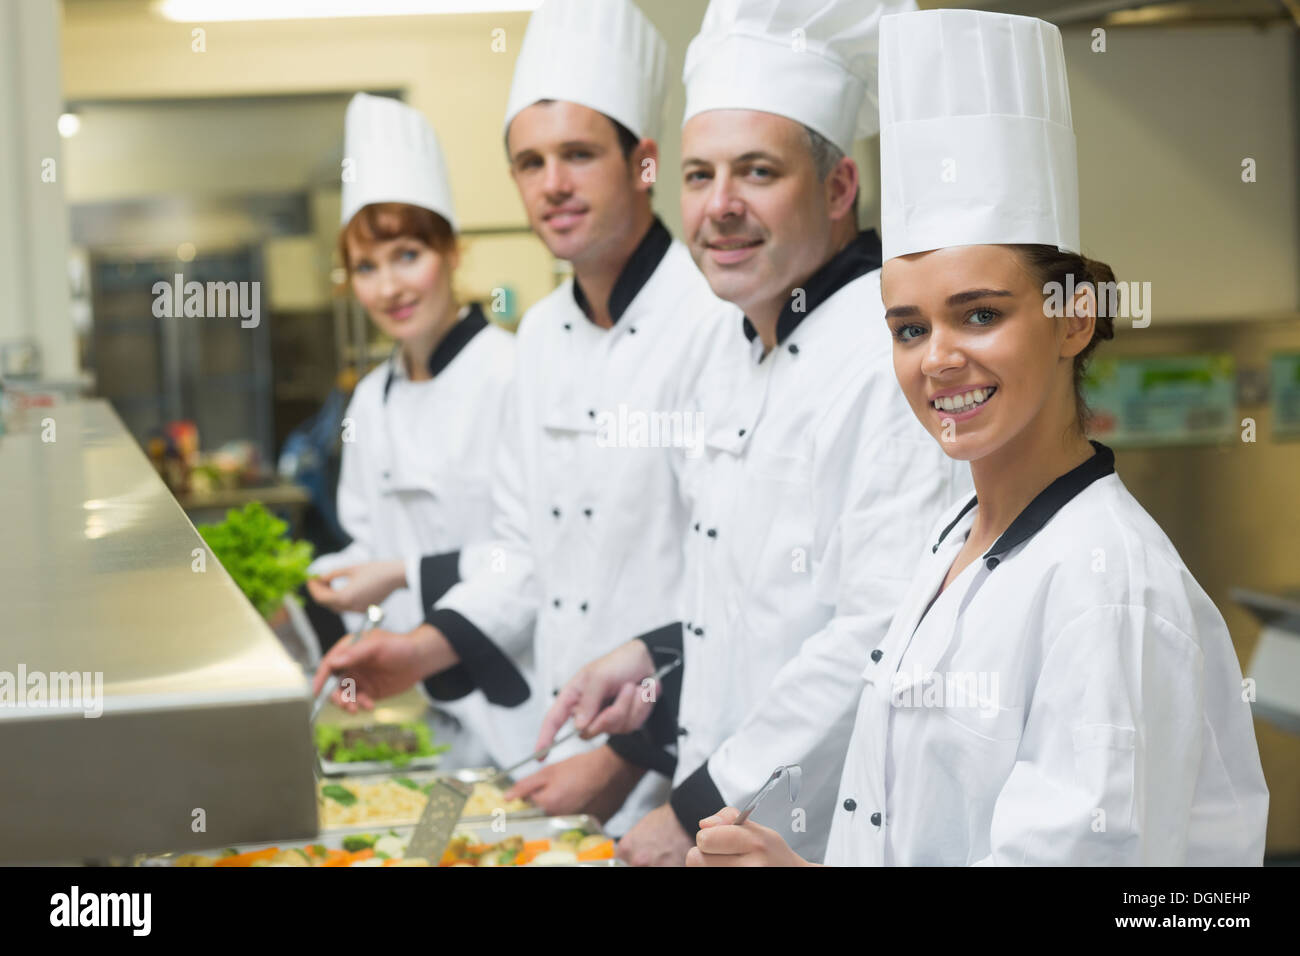 Four chefs smiling at camera while working at serving trays Stock Photo